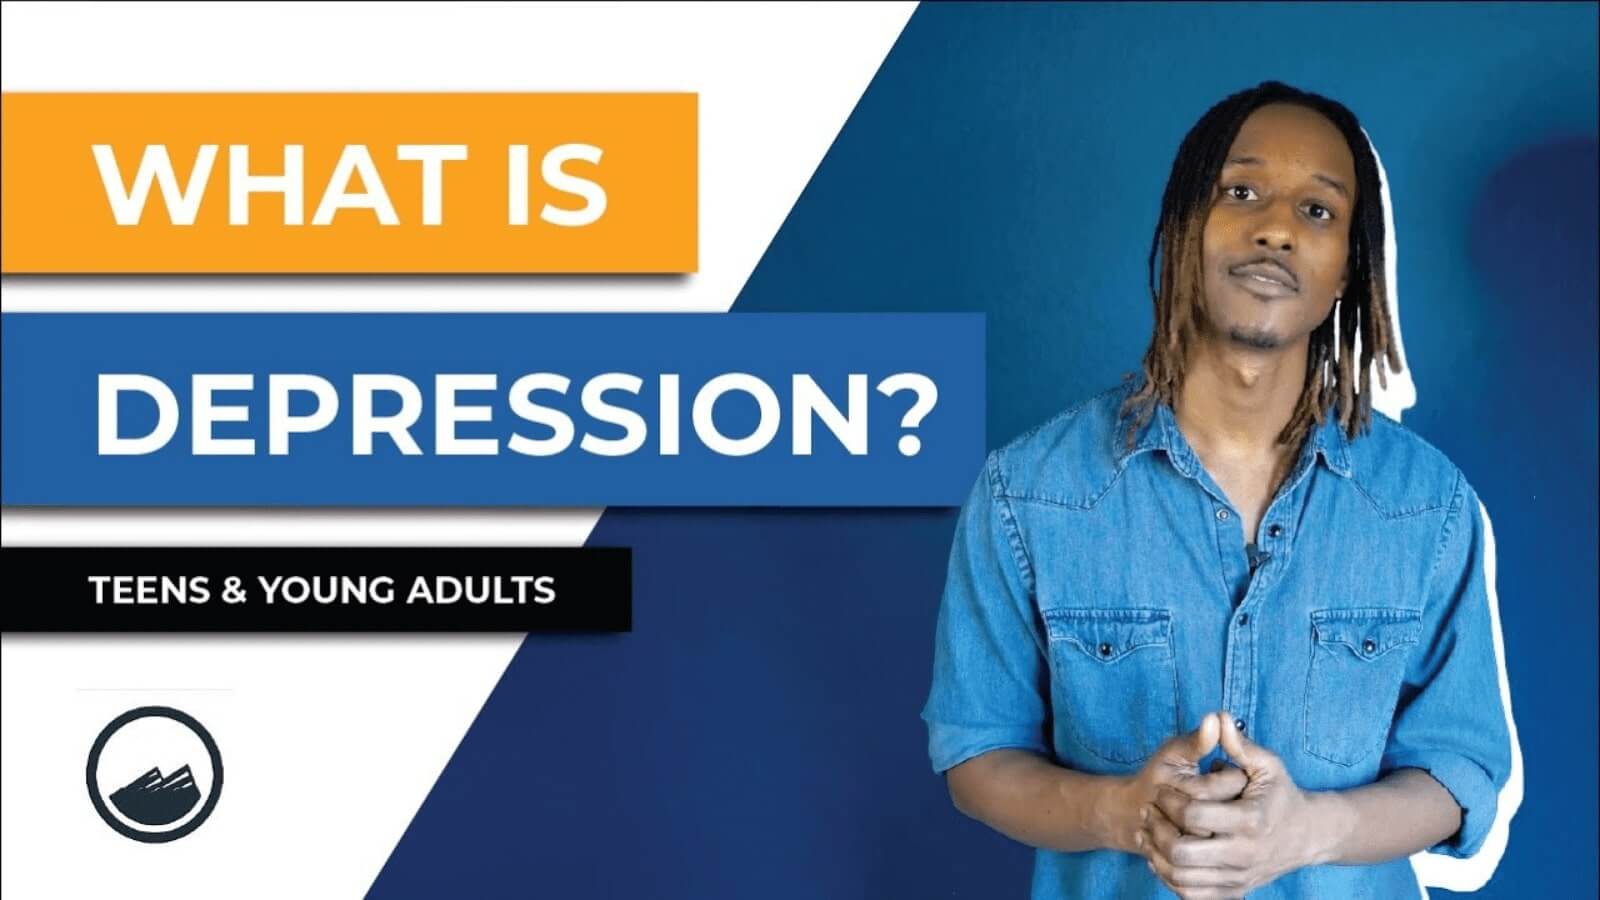 What is depression? Teens and young adults